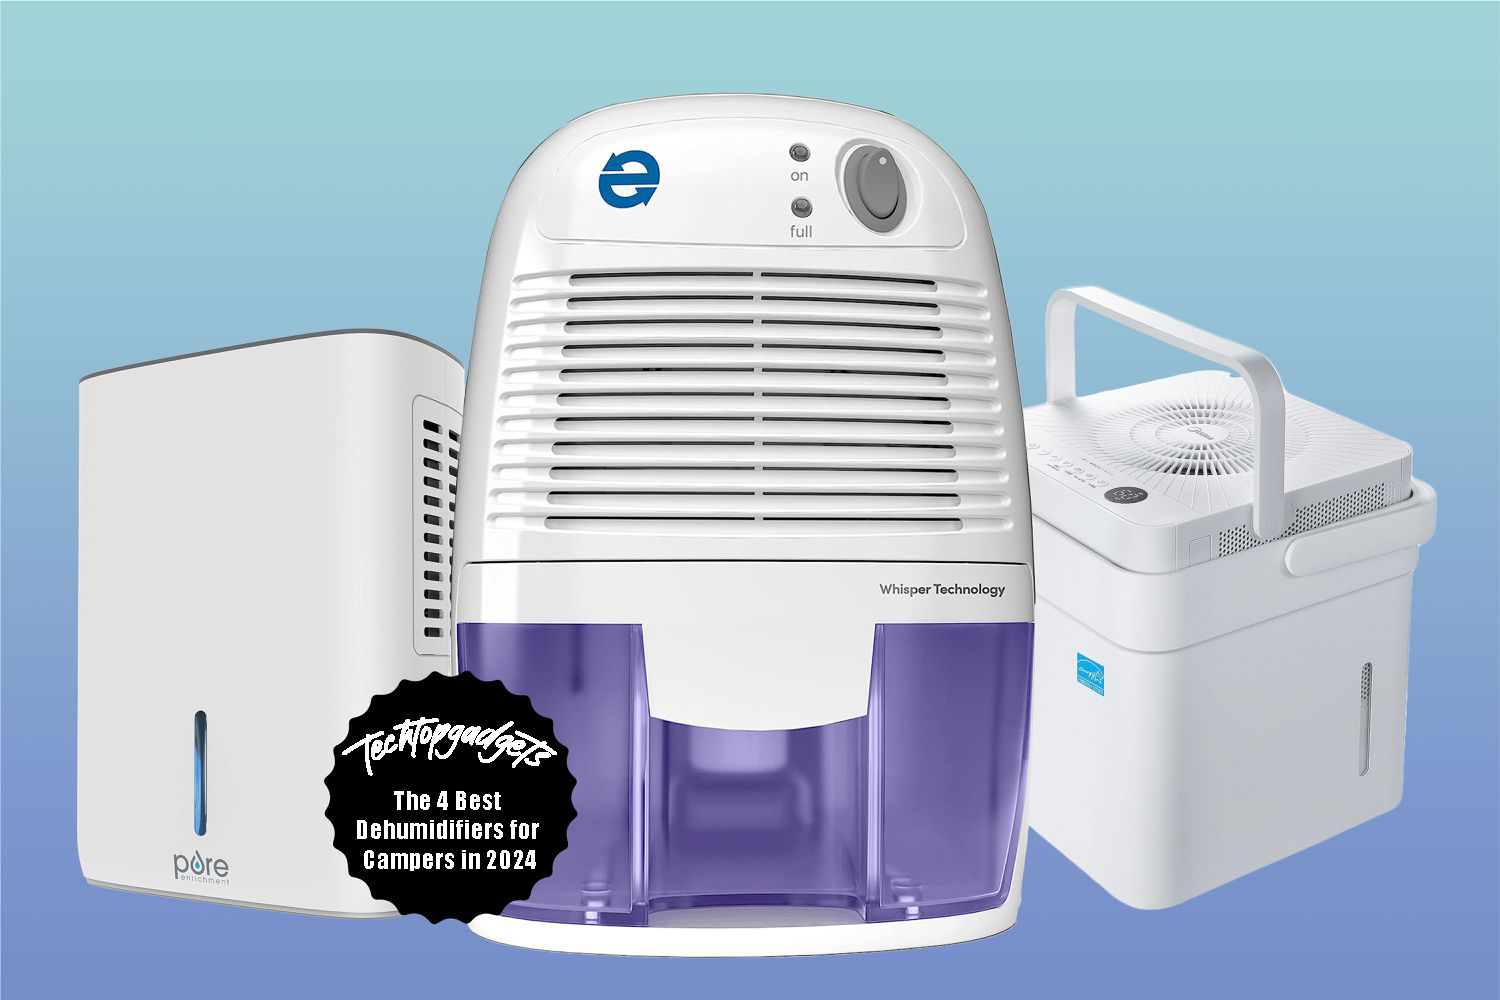 Showcasing the best dehumidifiers for campers in 2024, this image includes the Pure Enrichment, Eva-Dry, and Midea models known for their efficient moisture removal in compact living spaces.